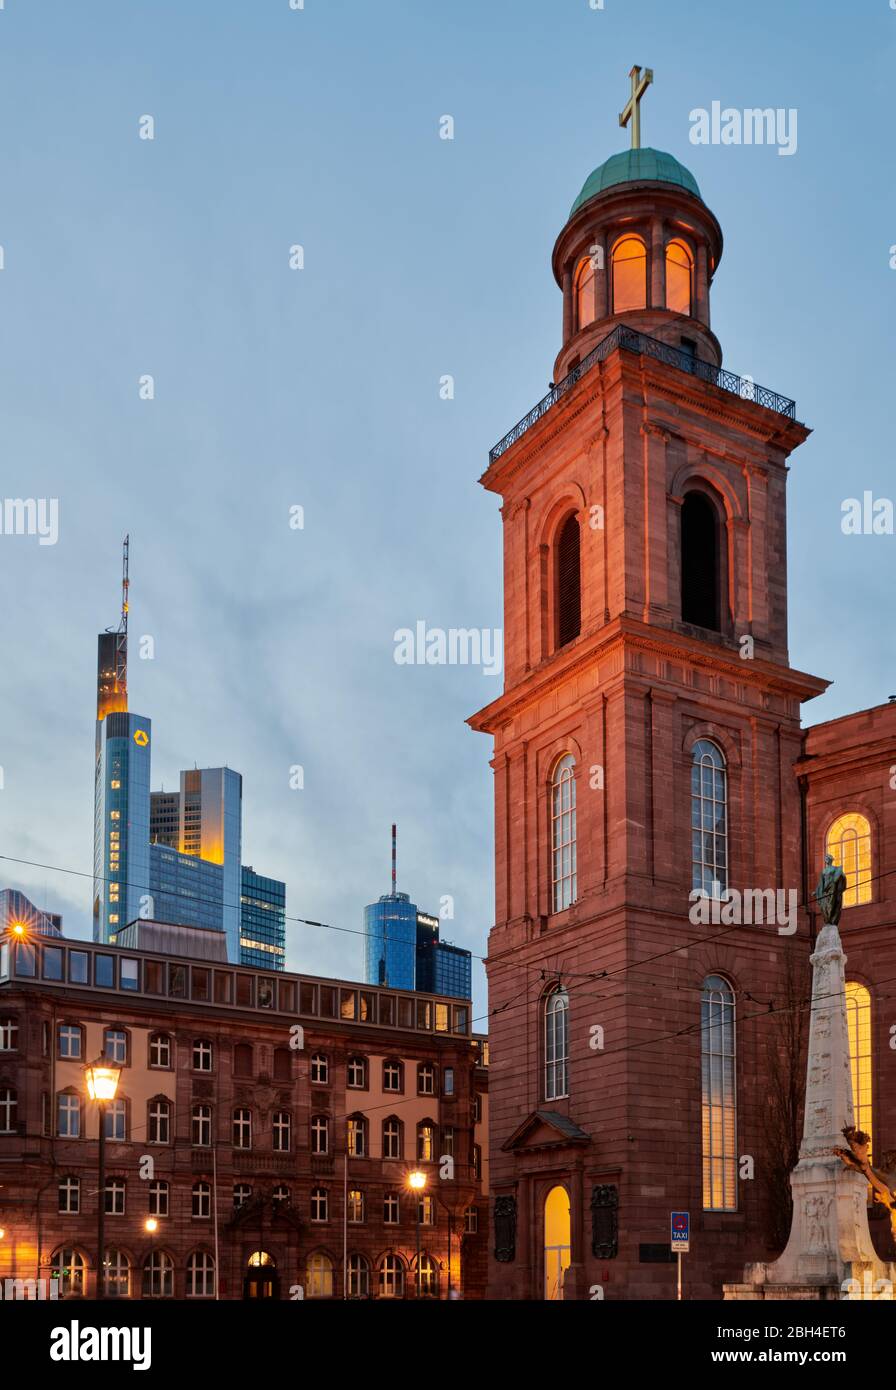 Frankfurt am Main, Germany, Febr 15 2020: The historic St. Paul's Church tower and the modern architecture of the Commerzbank in Frankfurt's historic Stock Photo